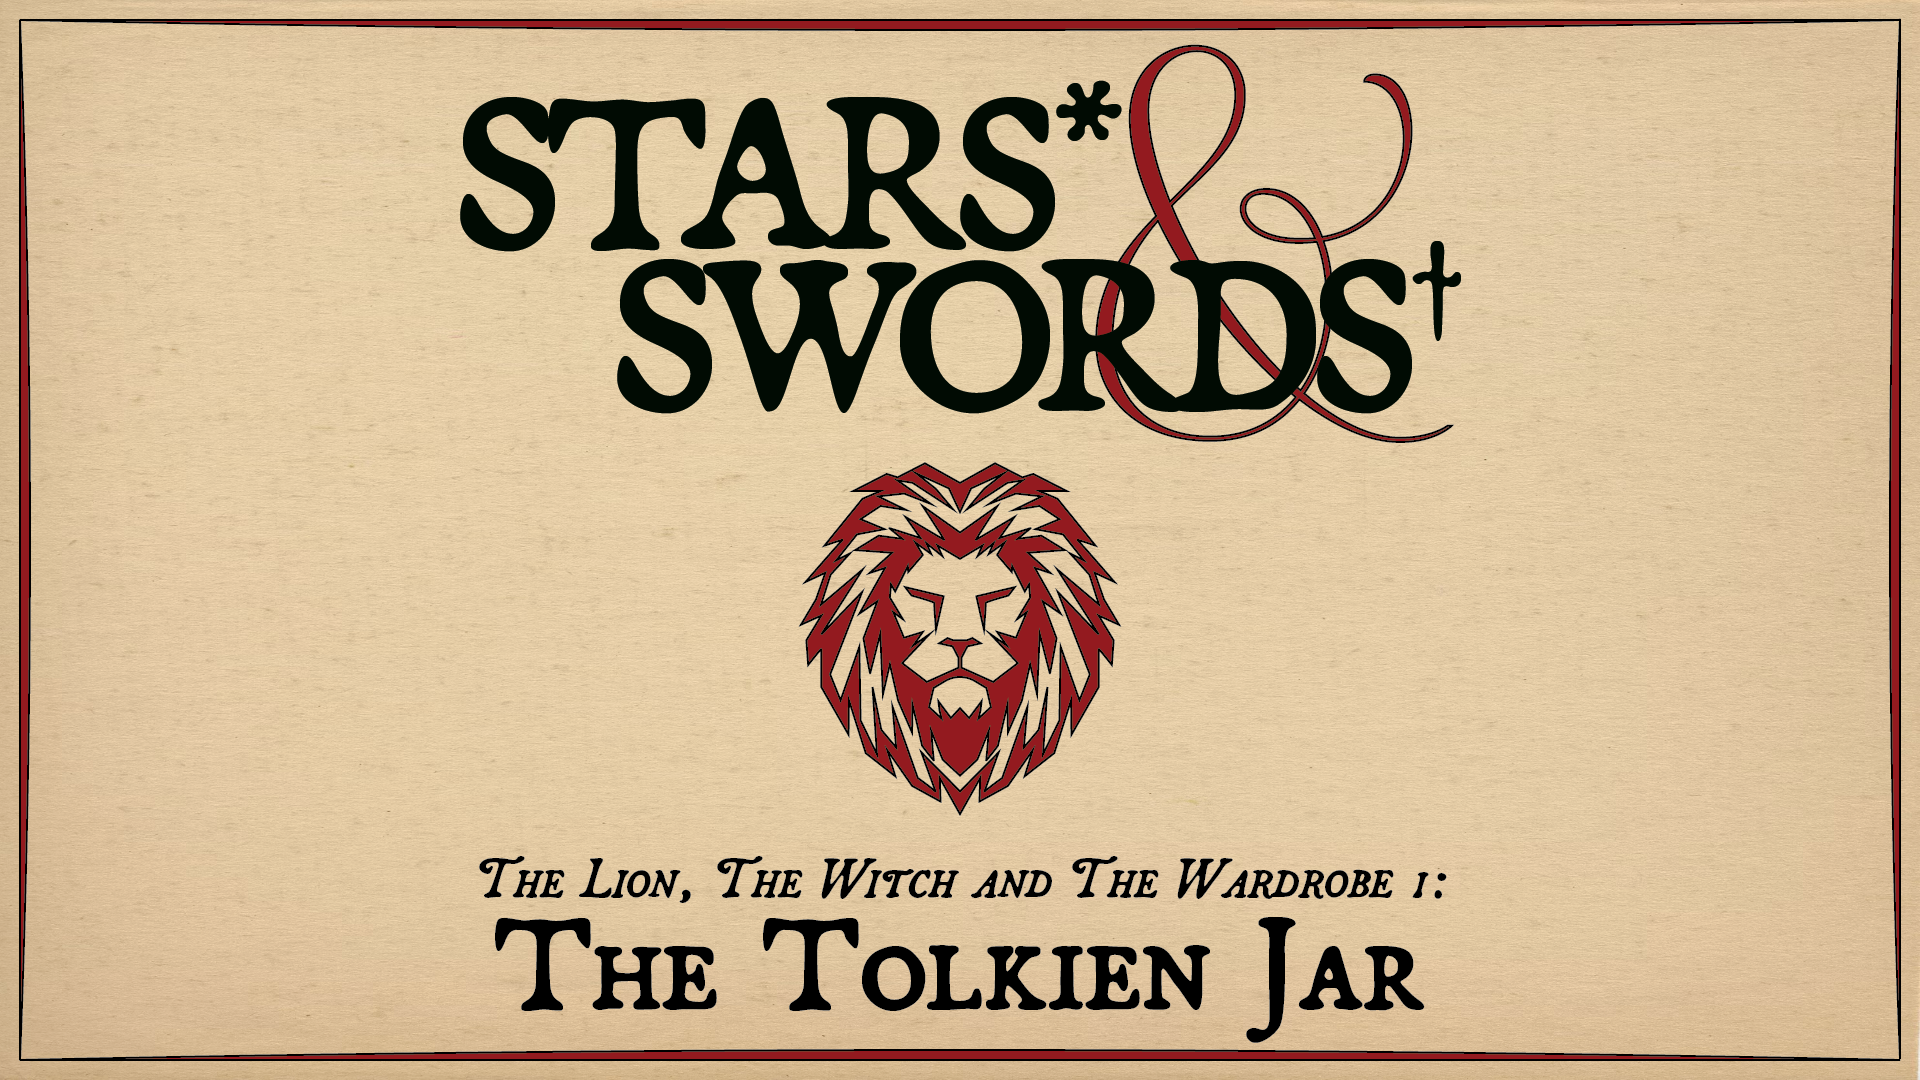 The Lion, The Witch And The Wardrobe 1: The Tolkien Jar